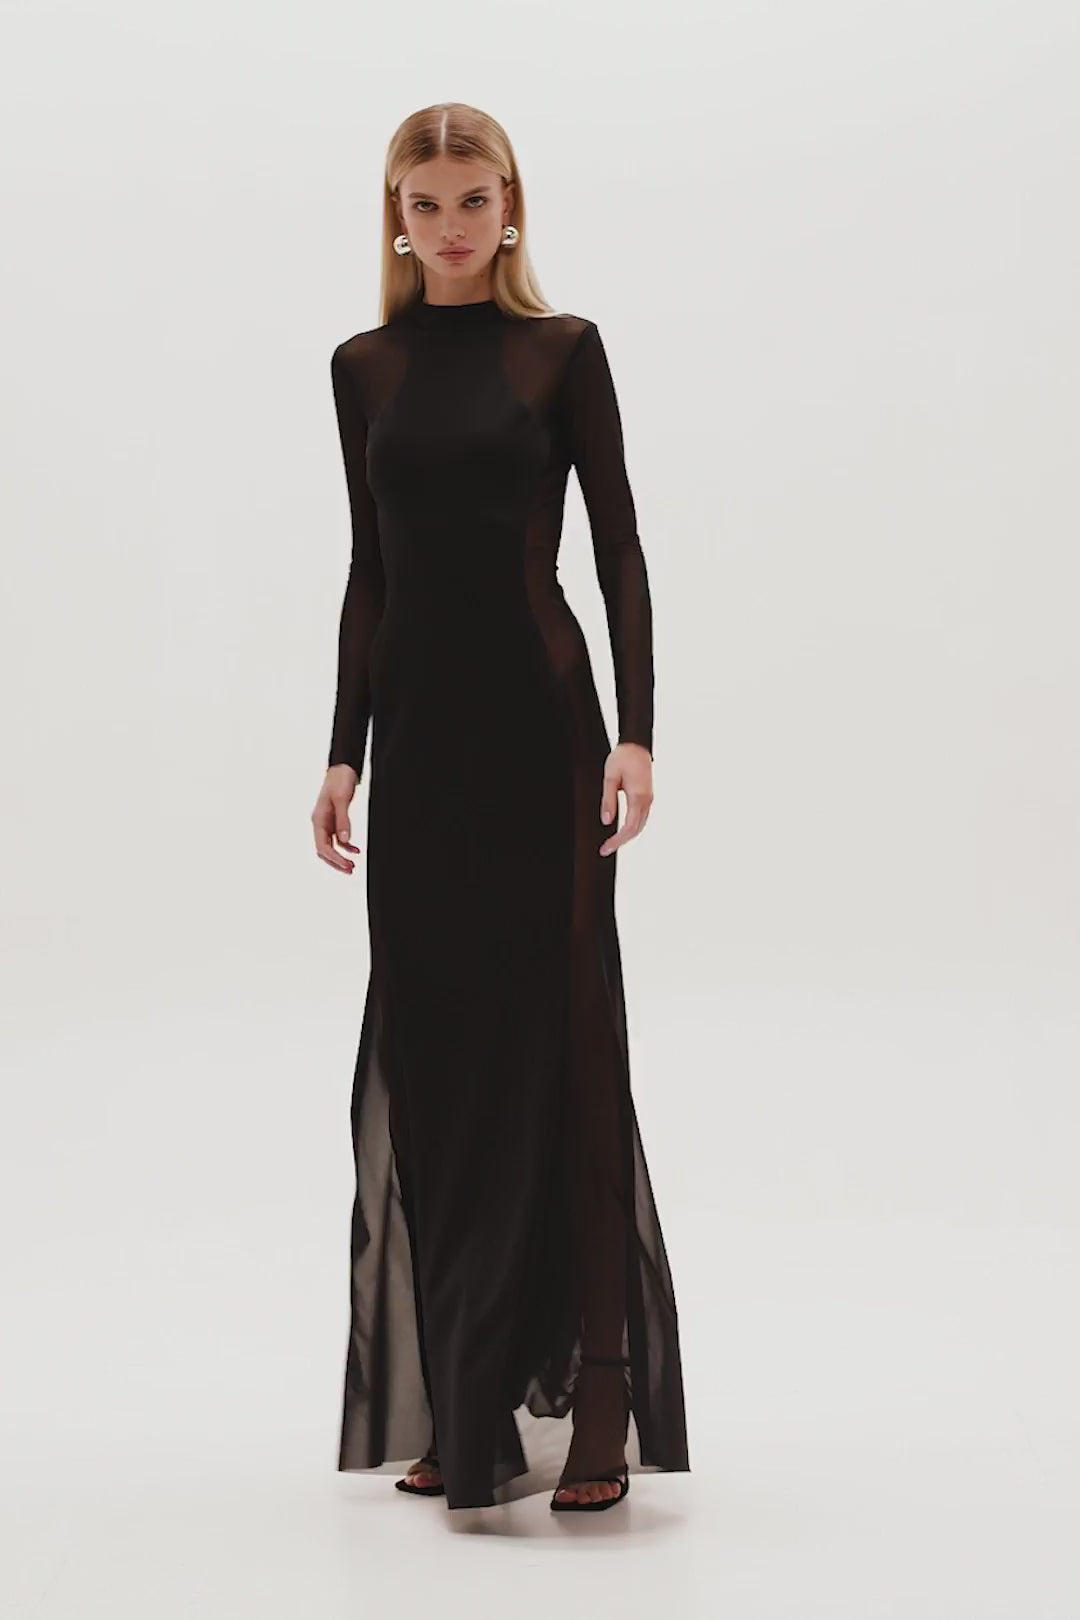 Showstopper black dress with semi-transparent inserts ➤➤ Milla